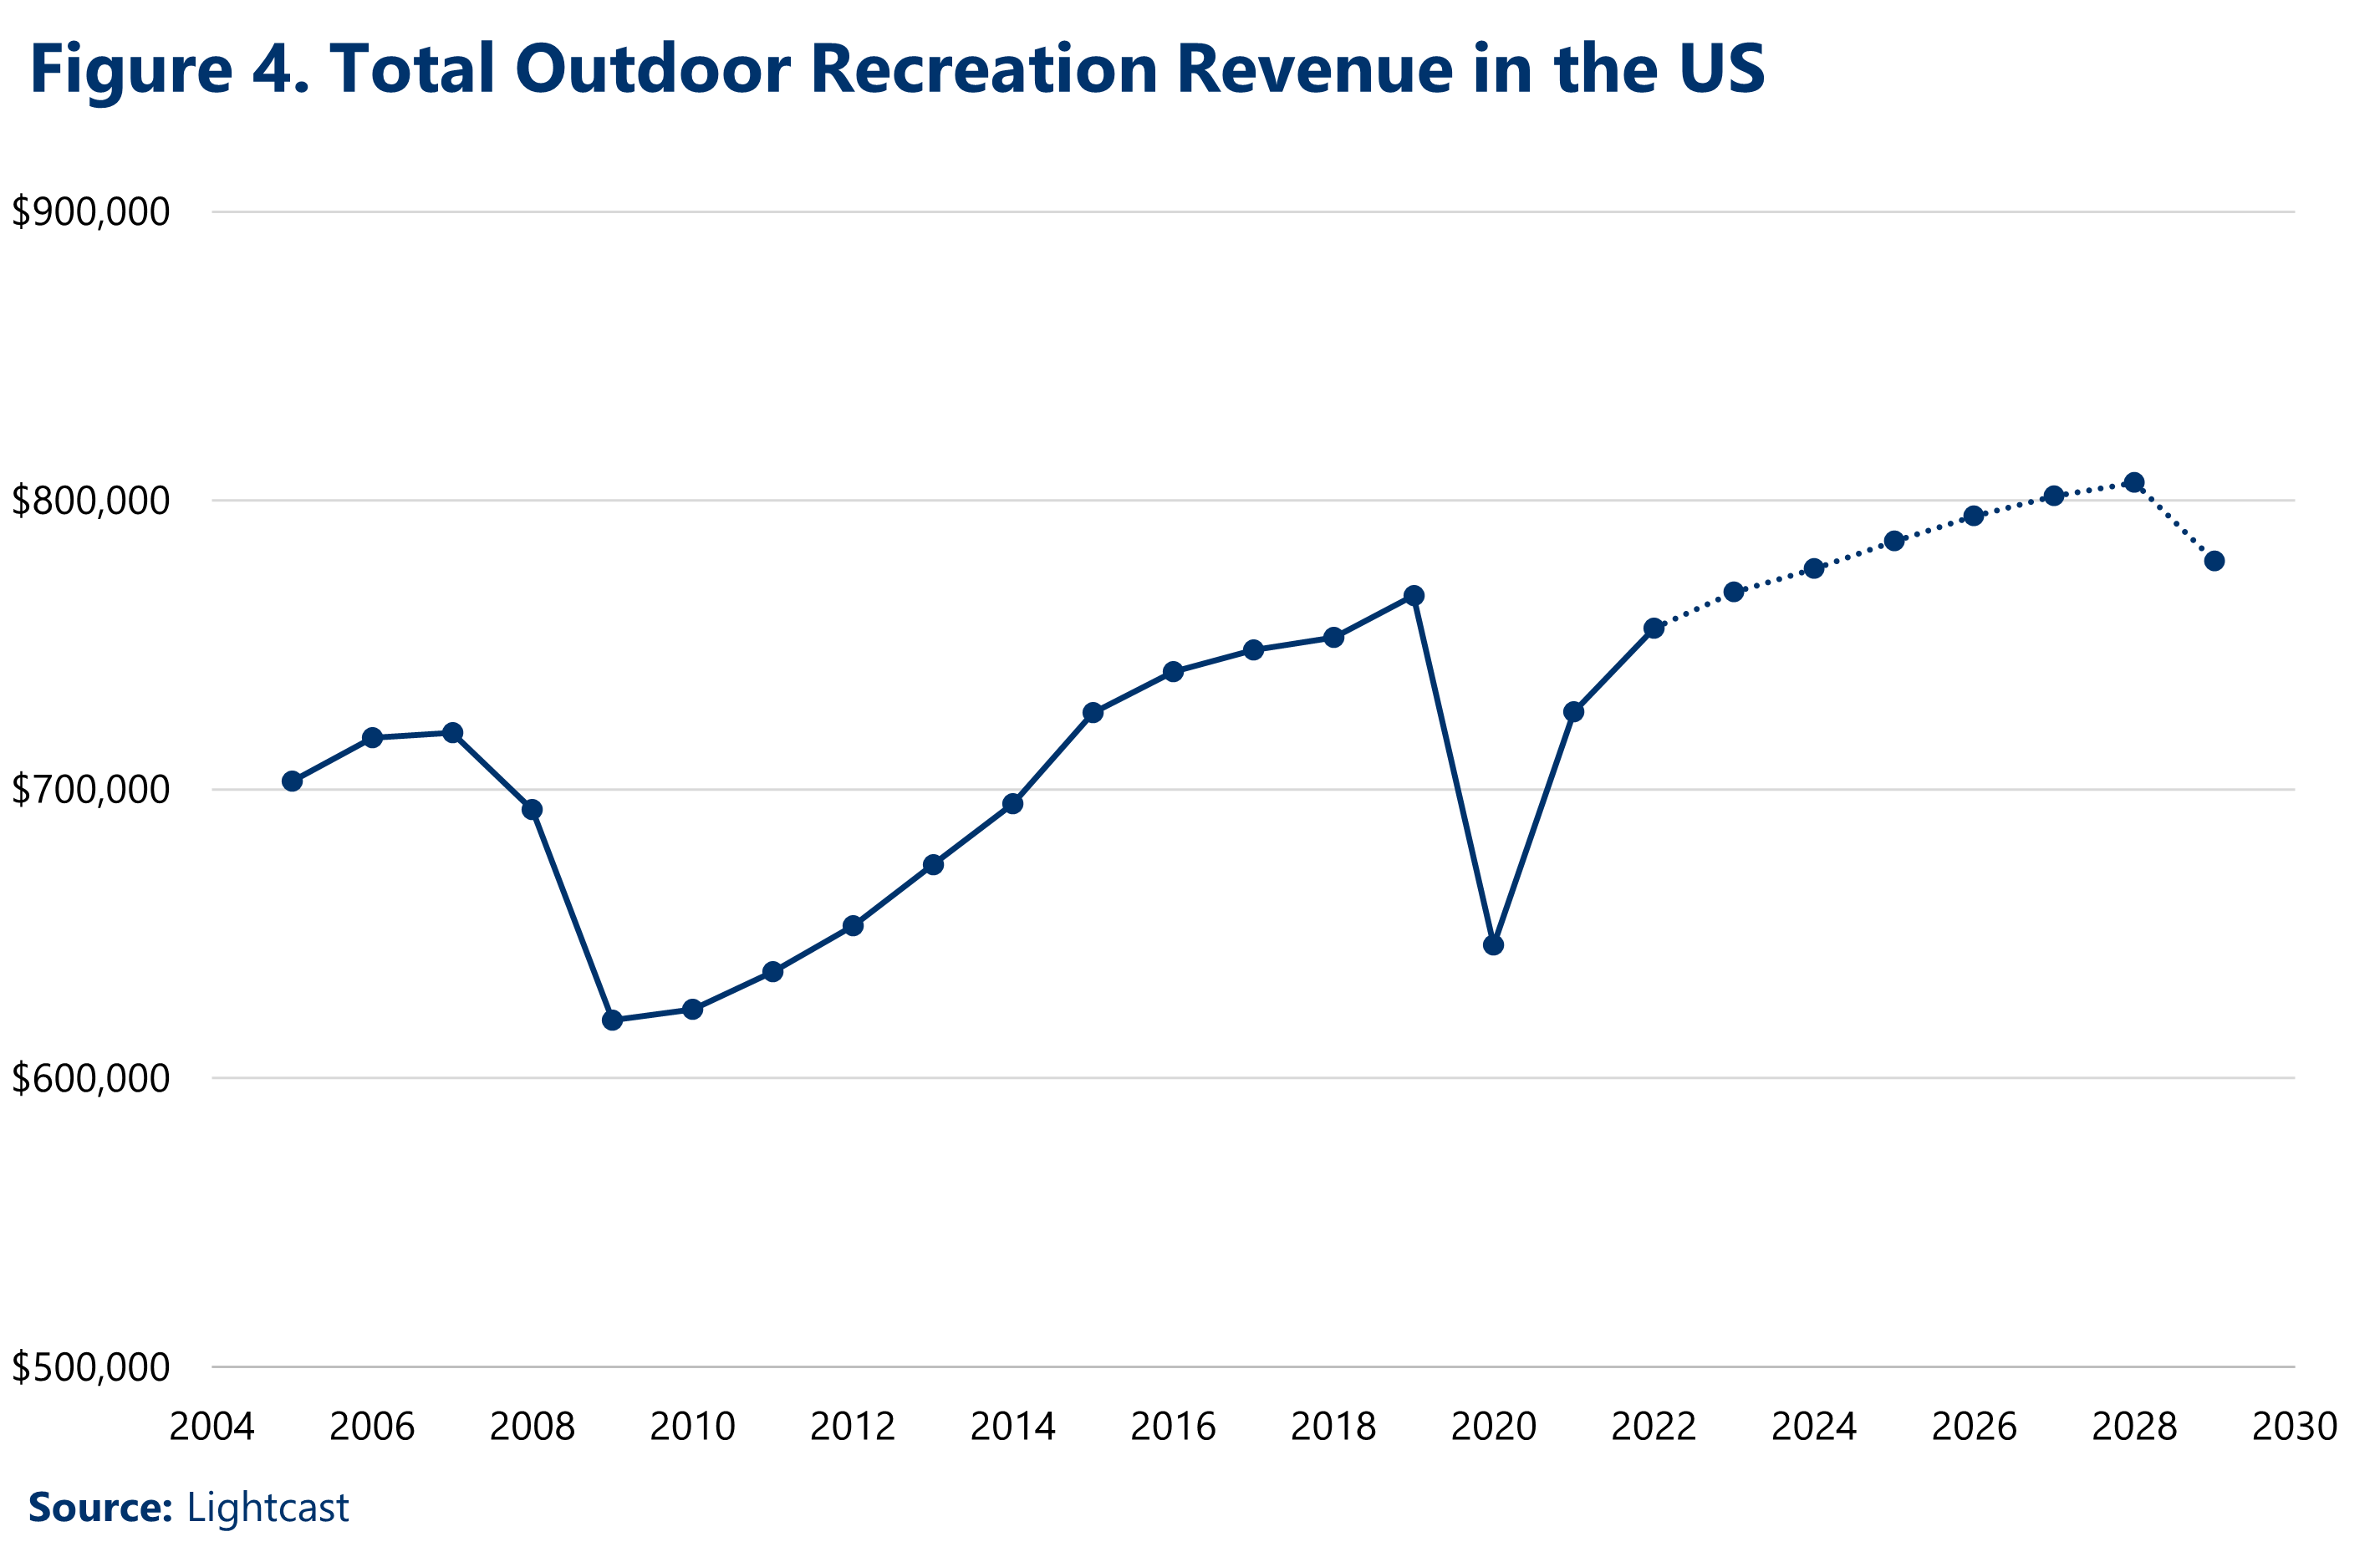 Figure 4. Total Outdoor Recreation Revenue in the US. A line chart shows stead growth in revenue from 2004 to 2007, a sharp dip in 2008 and 2009 during the Great Recession, strong growth through 2019, a sharp dip in 2020 during the pandemic, and recovery in 2021 and 2022. It projects continued increases in revenue through 2028, followed by a slight decline in 2029. Source: Lightcast